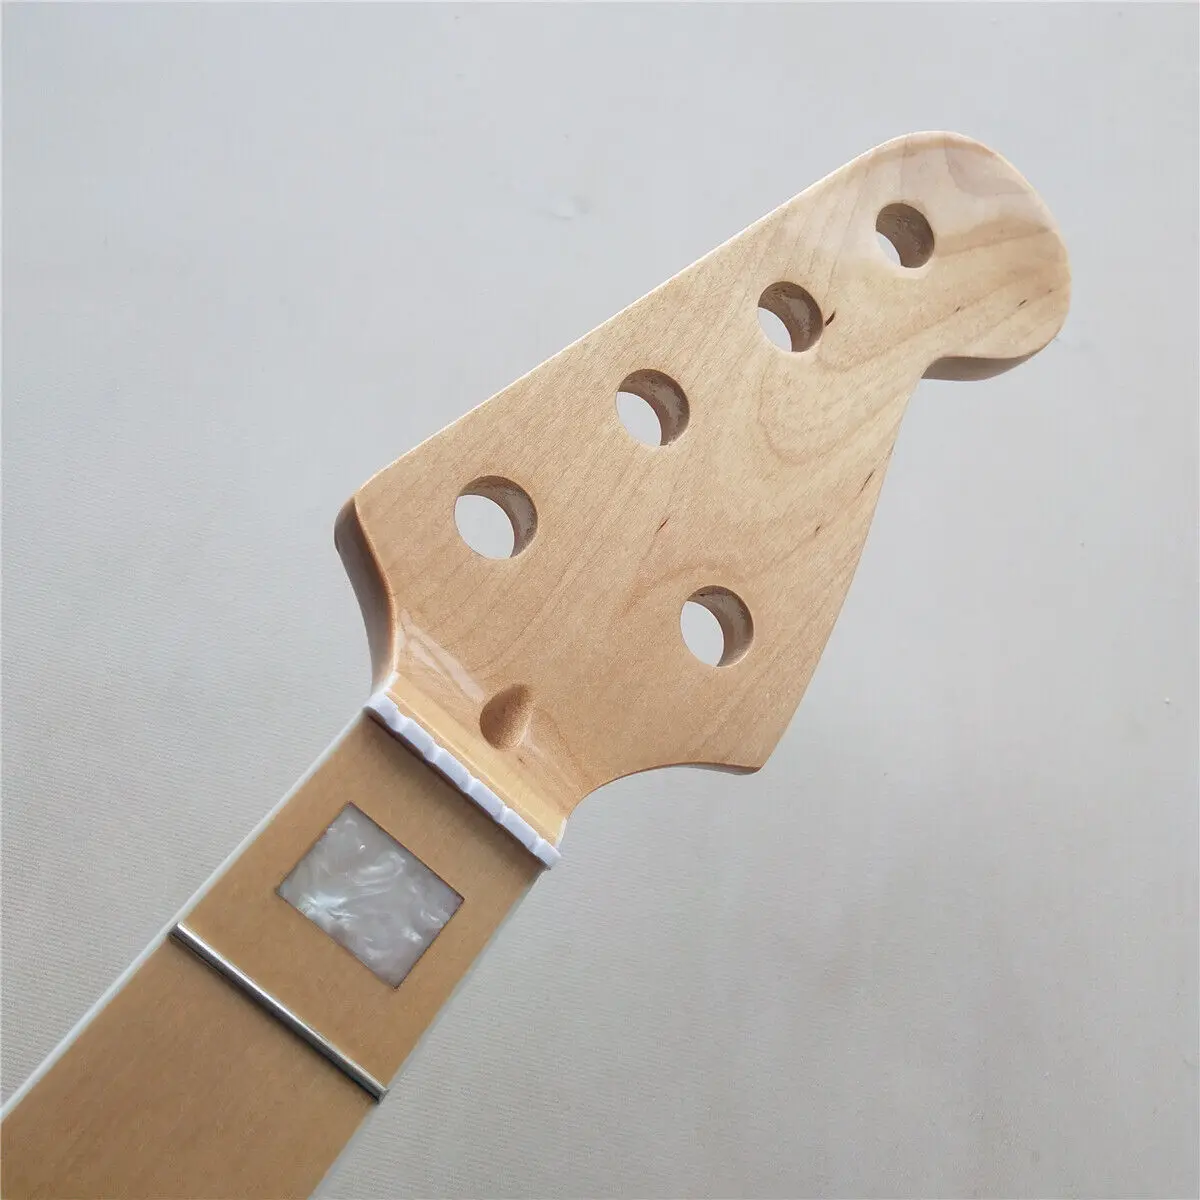 21 Fret 75mm Heel width 5 String Maple Bass Guitar Neck Maple Fingerboard inlay New Replacement